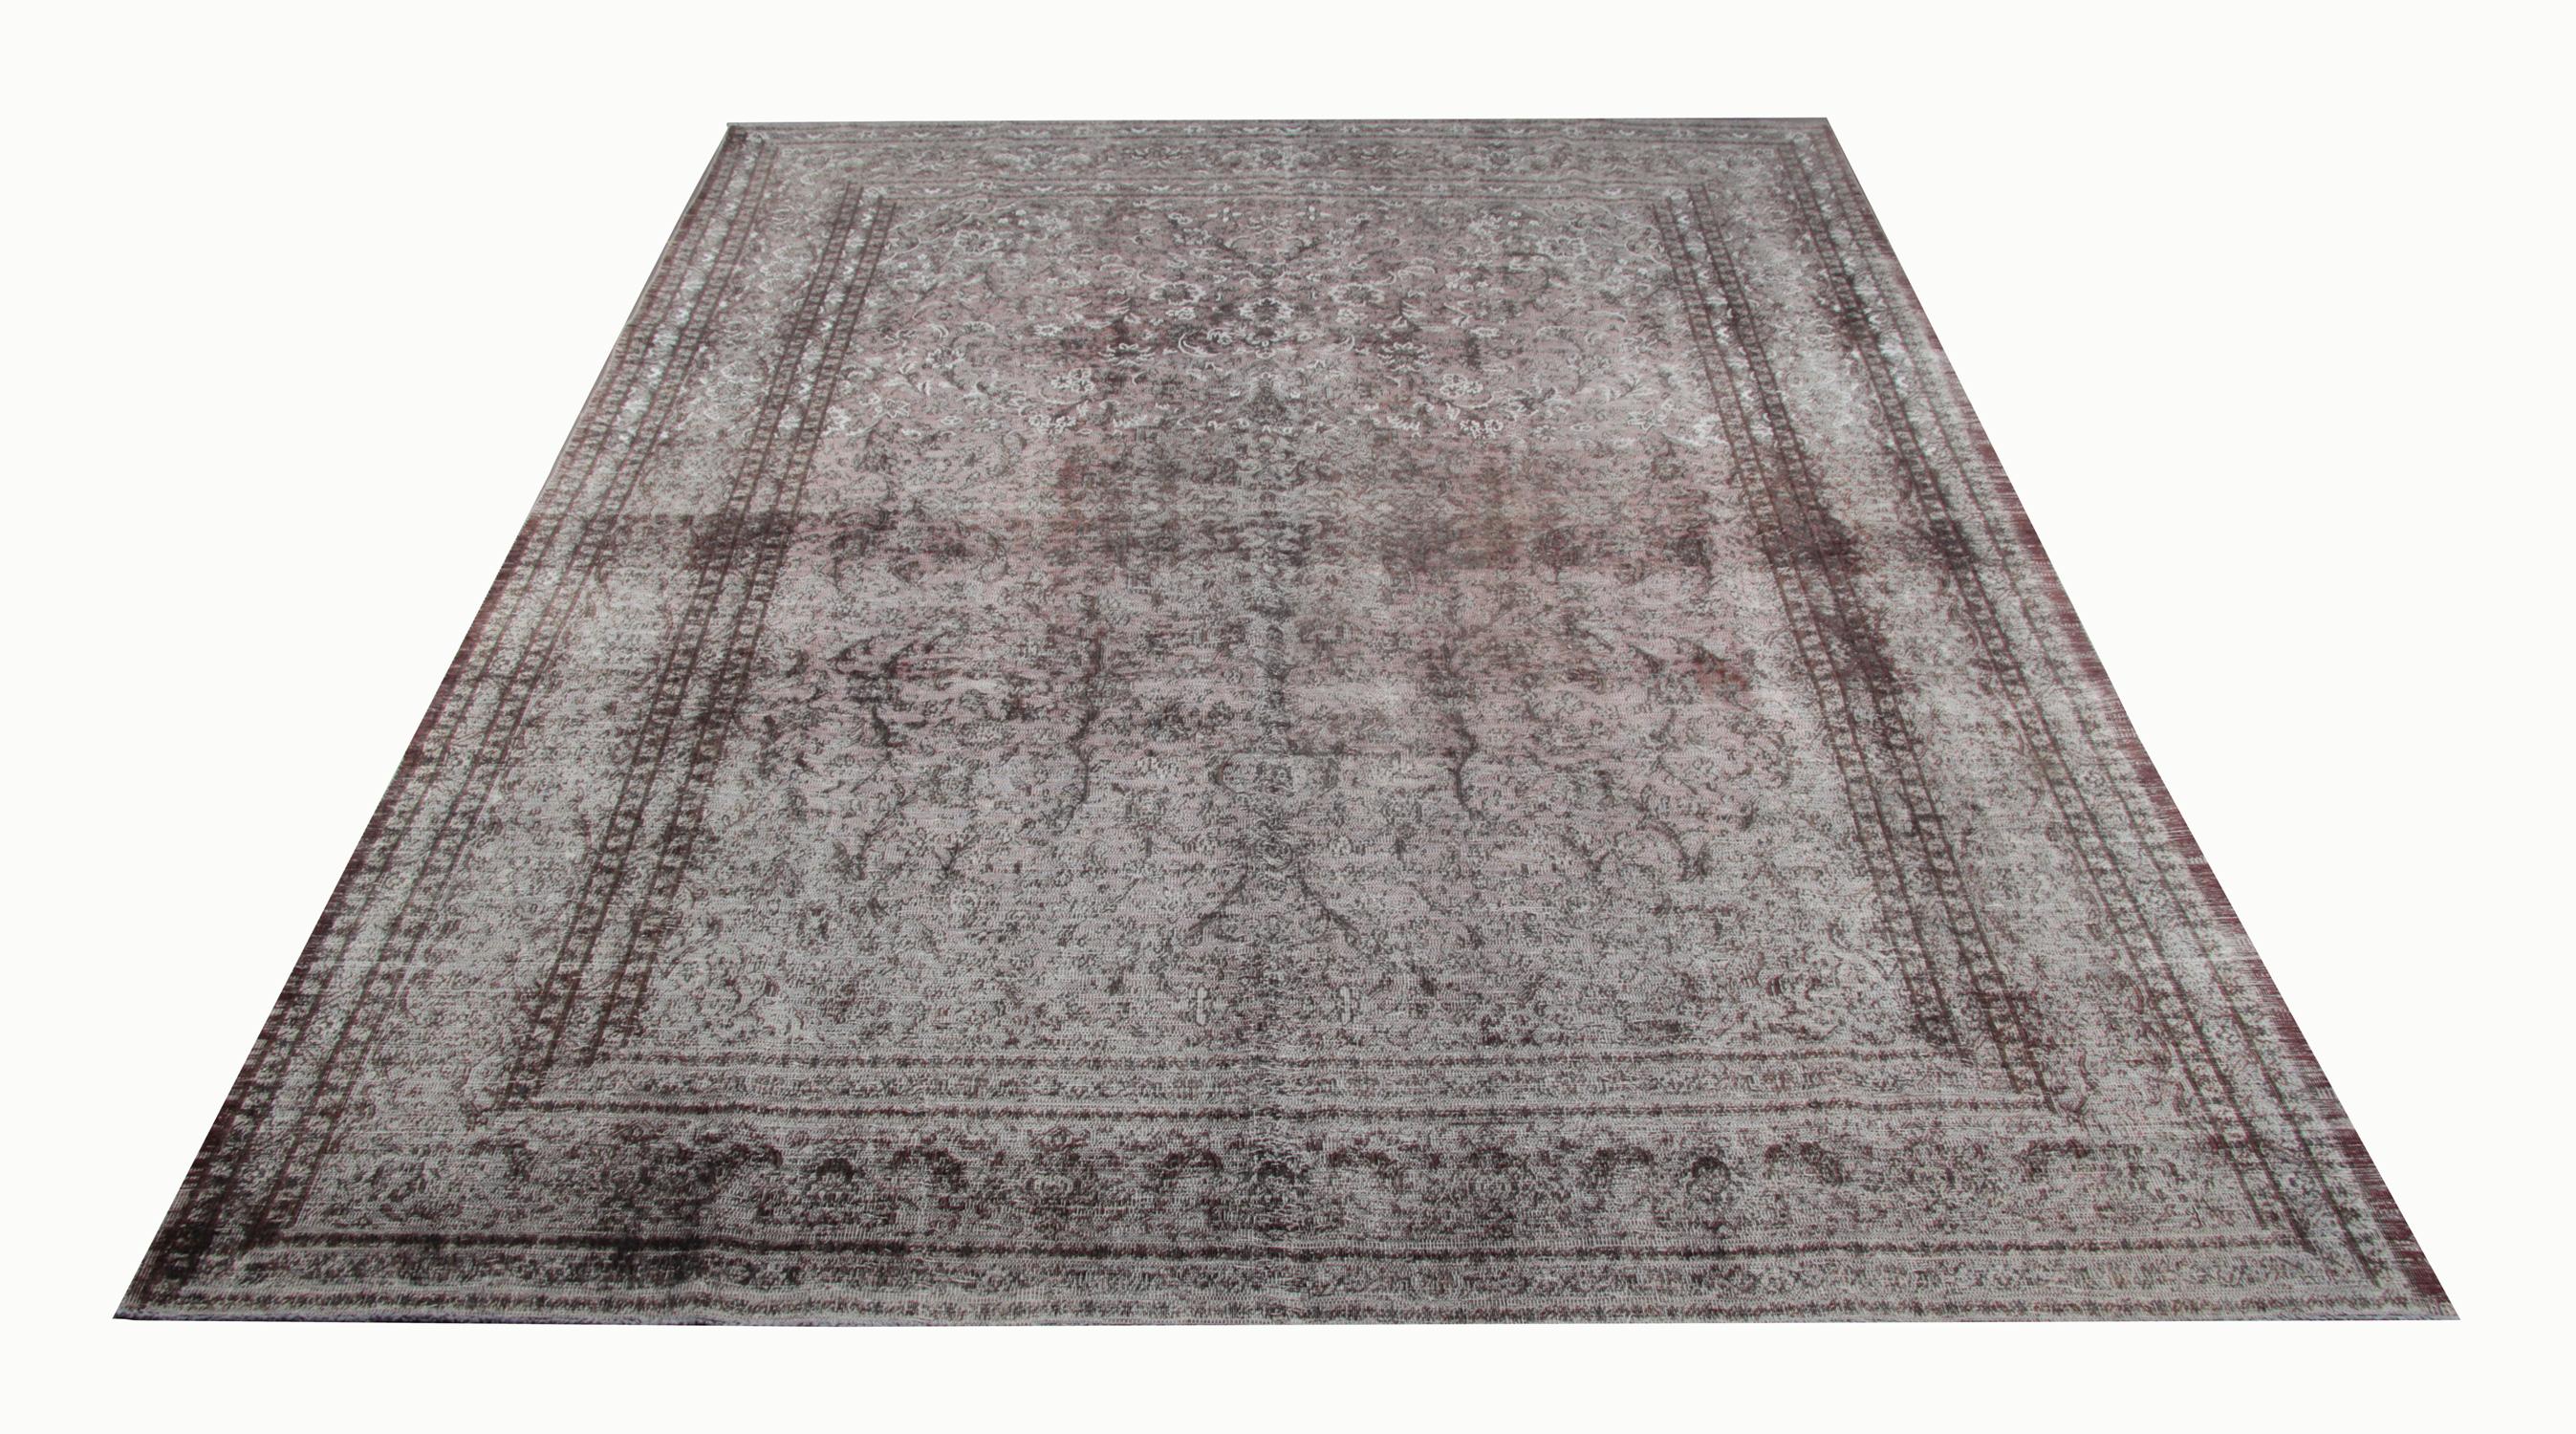 This distressed over-dyed rug is one of the best choices as Home decor objects. This grey rug has been distressed and over-dyed to achieve a contemporary, worn piece. This unique piece has an all-over design and browny-grey accents.
Sure to